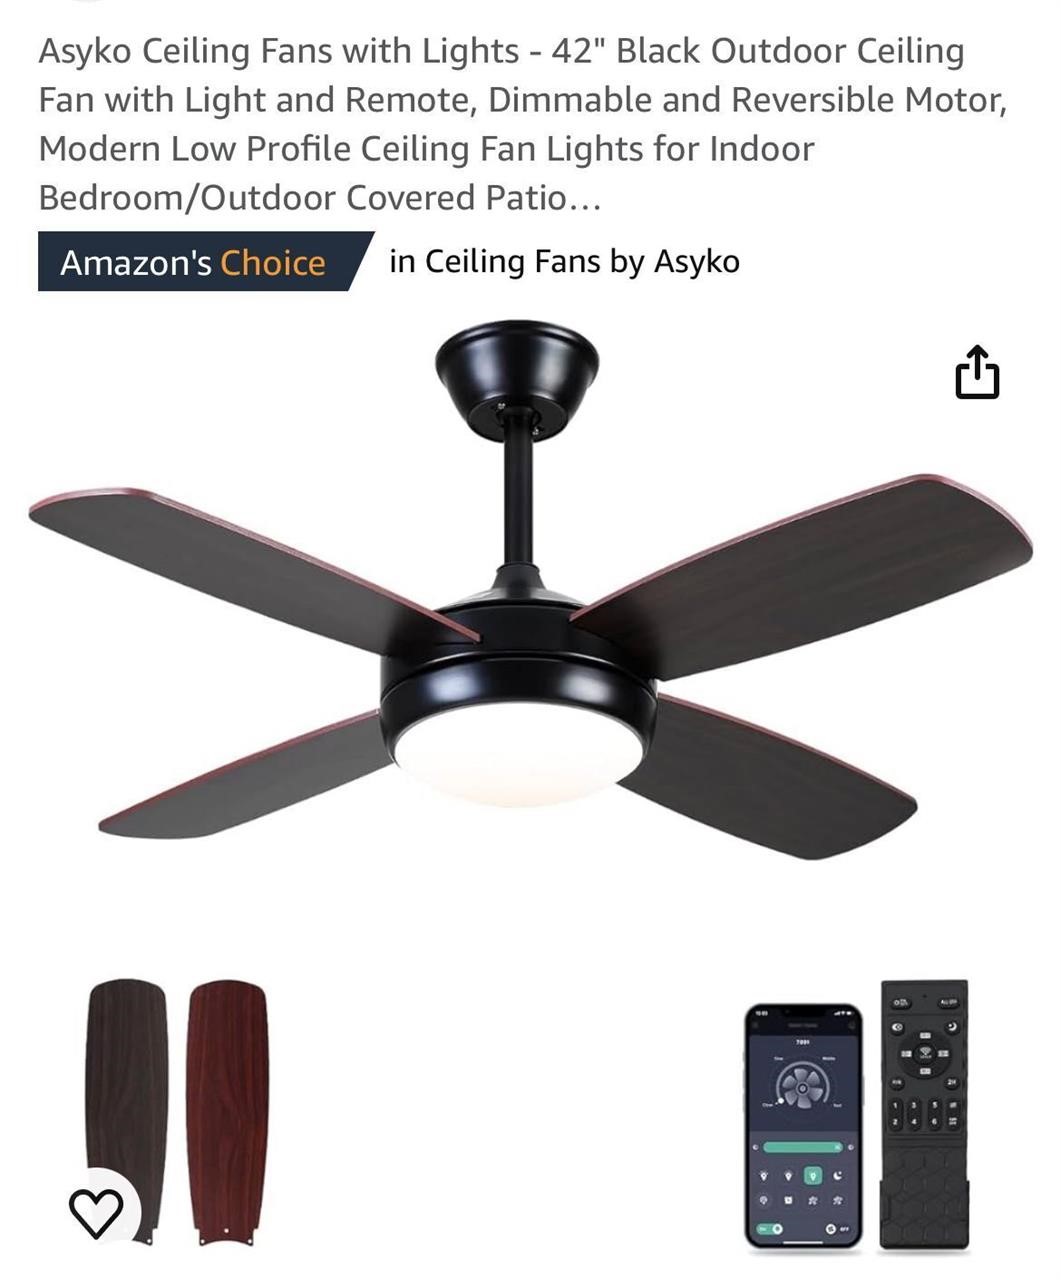 Asyko Ceiling Fans with Lights - 42"